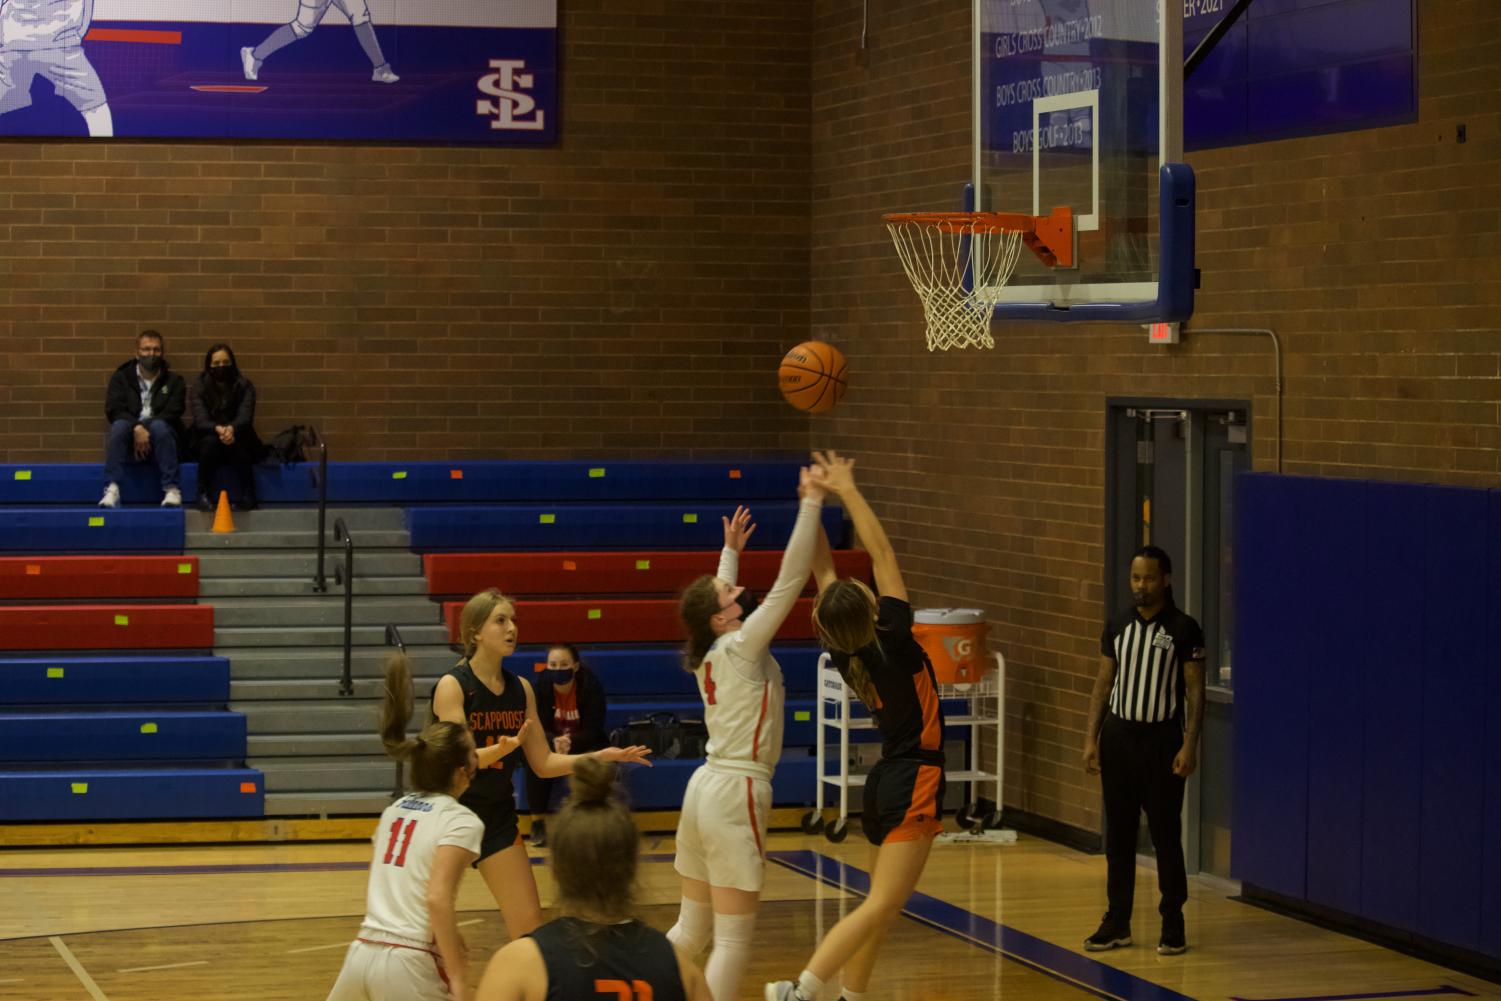 %239+La+Salle+Girls+Varsity+Basketball+Team+Takes+a+Win+at+Home+Against+%2318+Scappoose